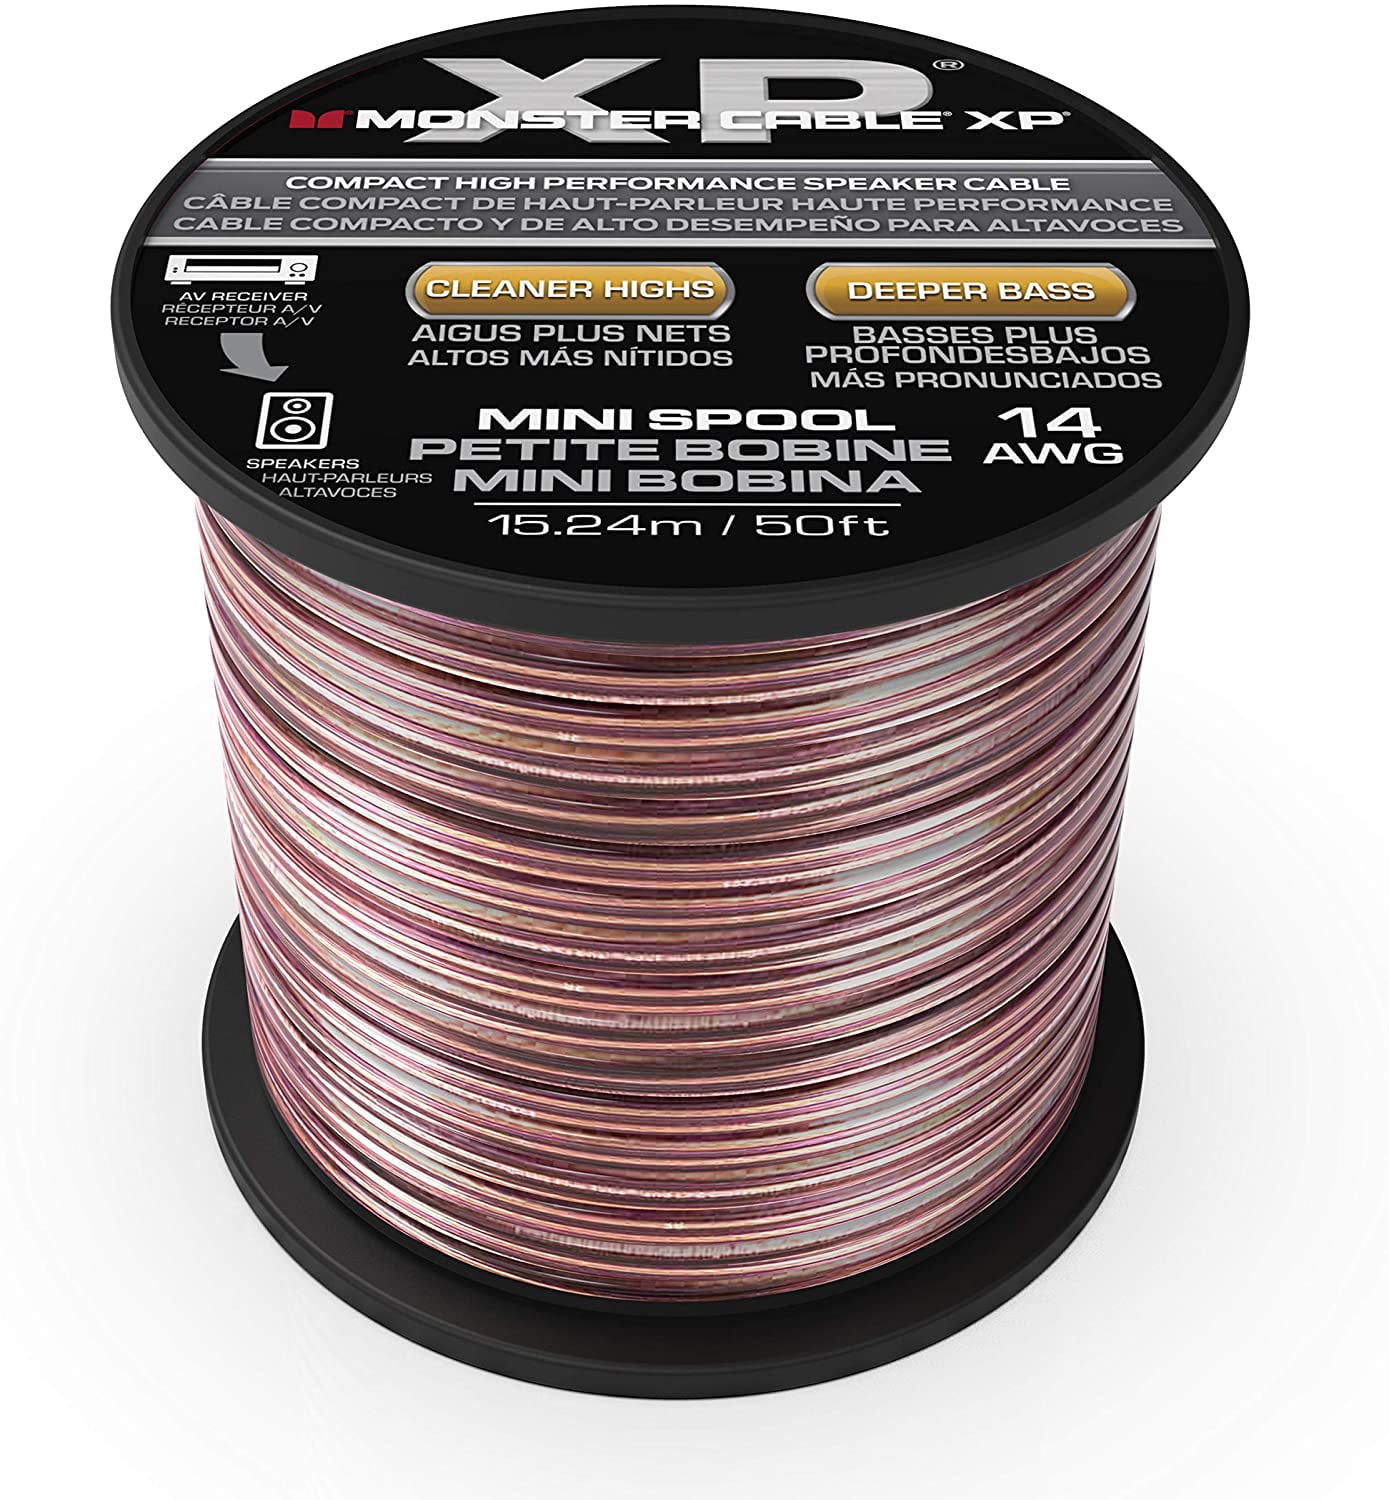 B&P Lamp Bare Copper Ground Wire 50 Foot Spool 18 Gauge 